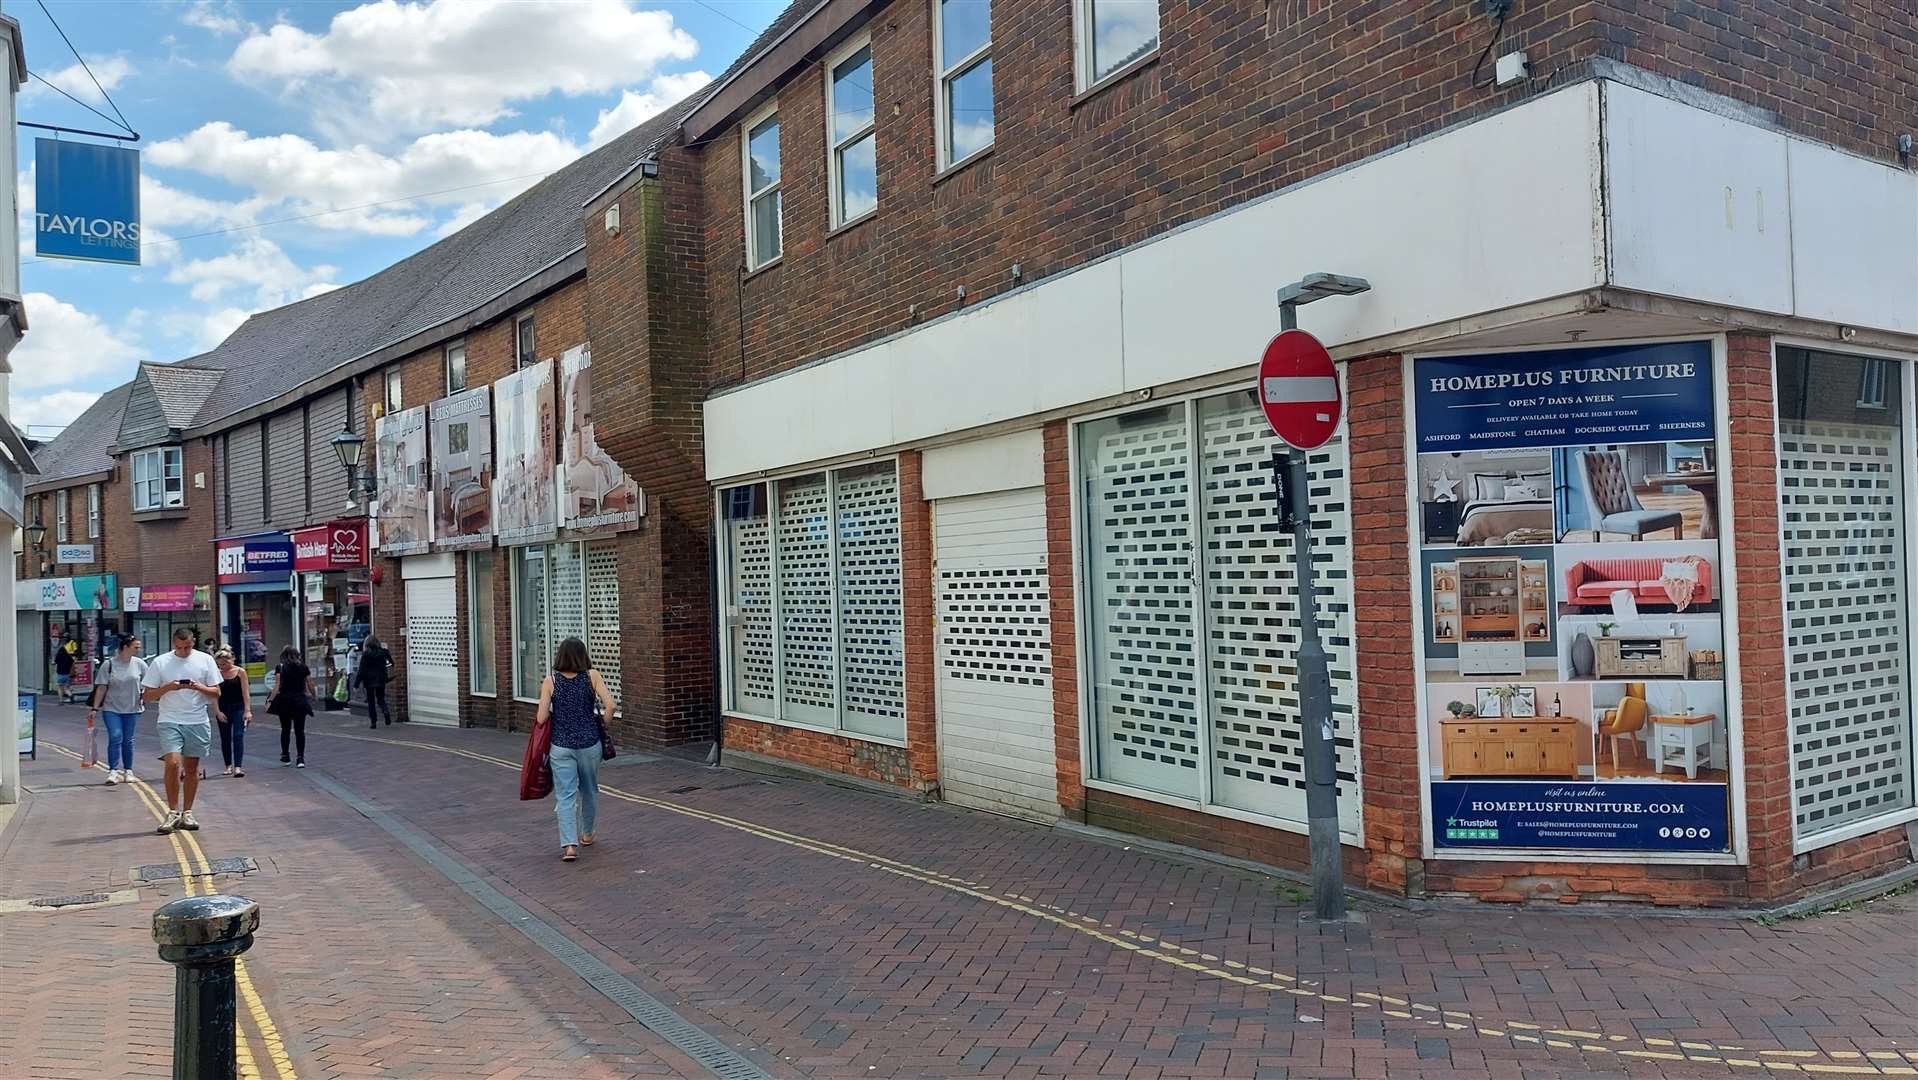 Six shops, including the former Argos, will be knocked down to make way for the development